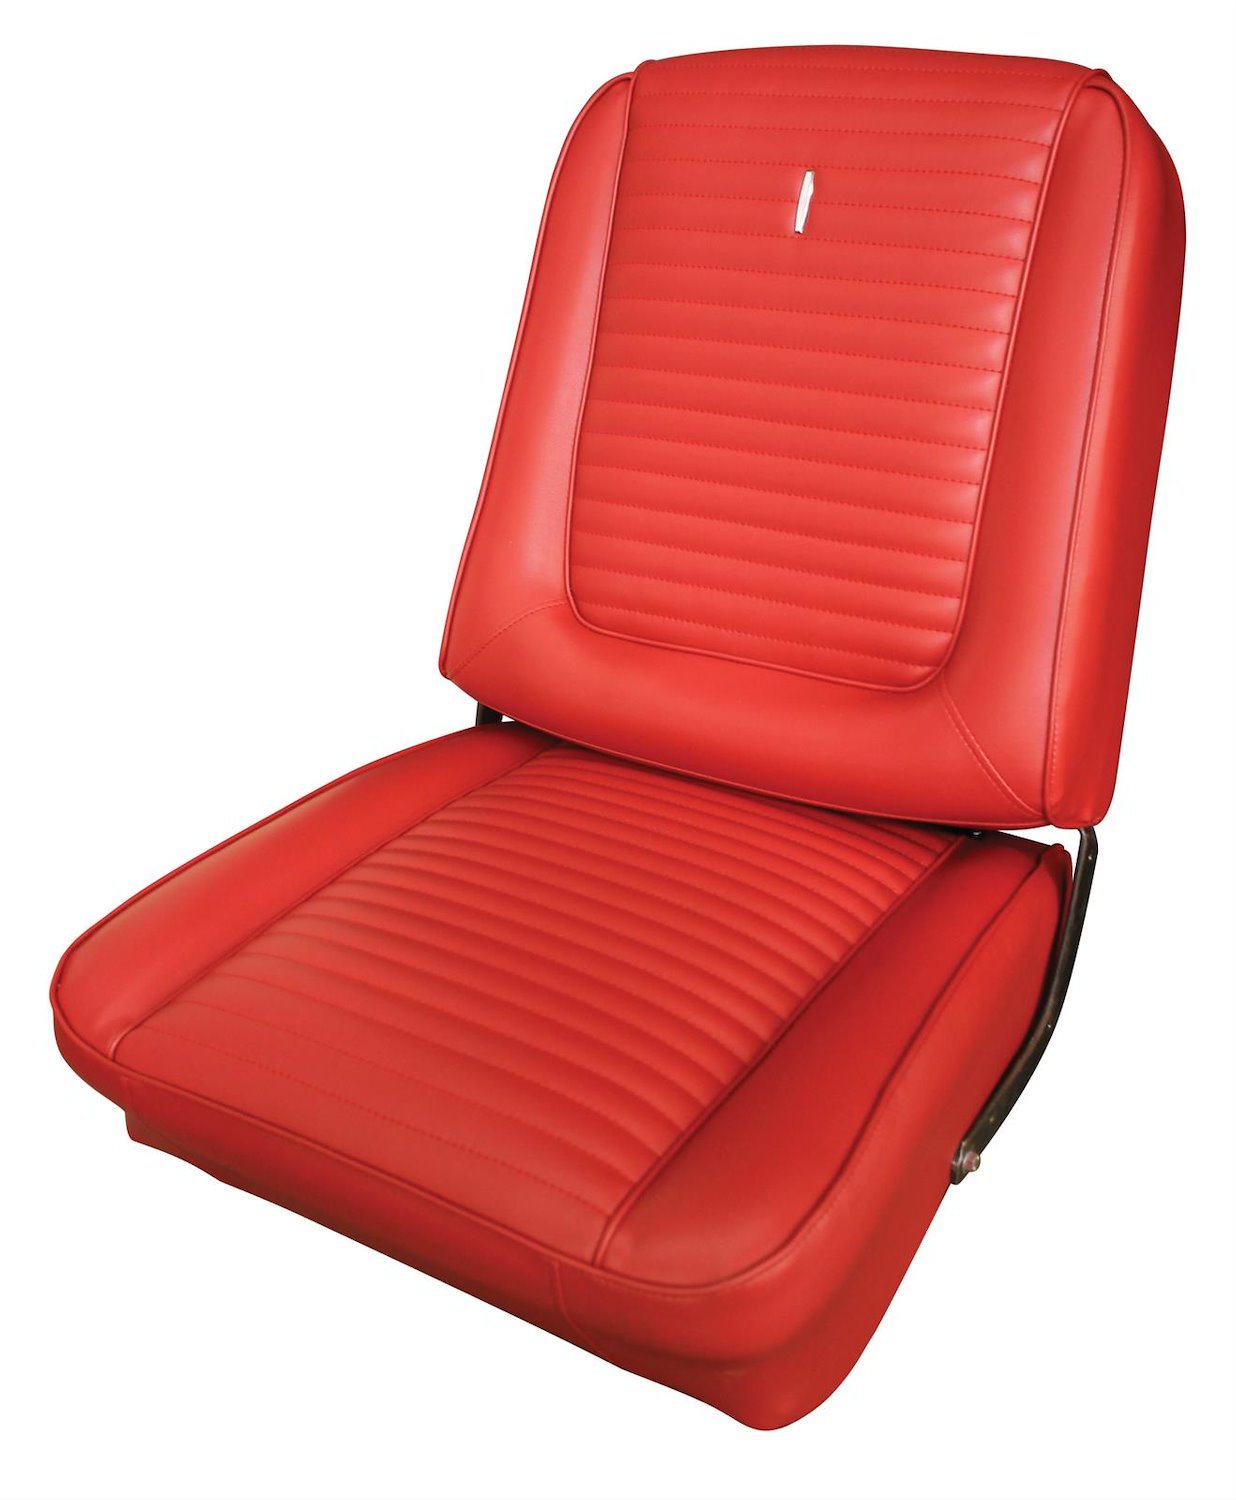 1965-1966 Ford F-100 and F-250 Truck Custom Cab Standard Two-Tone Interior Front Bench Seat Upholstery Set